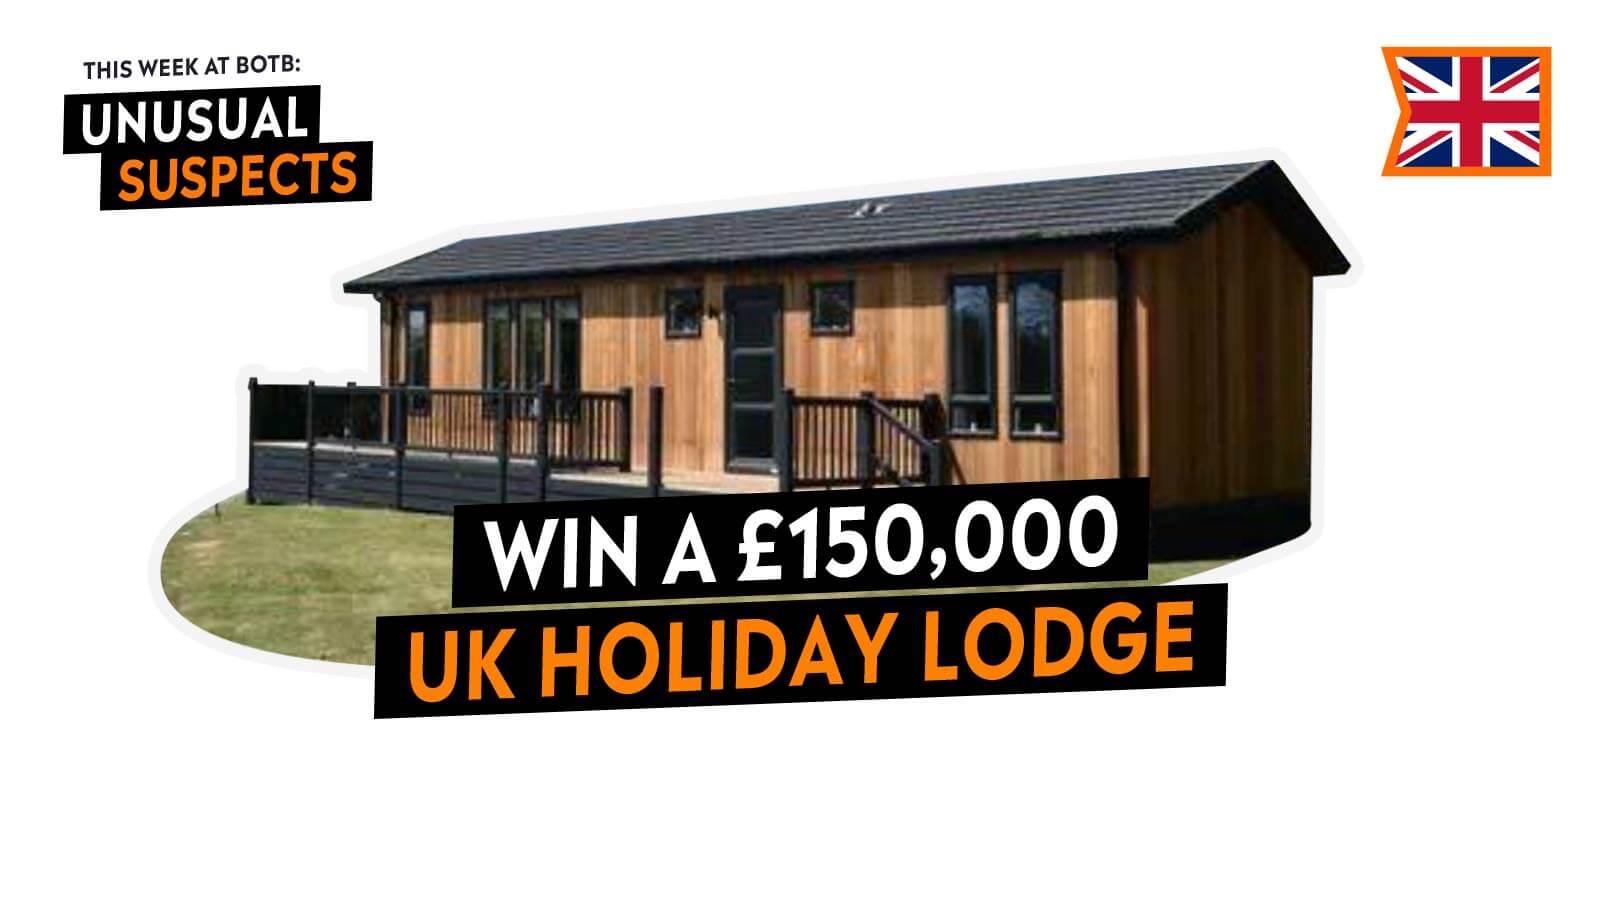   £150,000 UK Holiday Lodge: You choose the location!